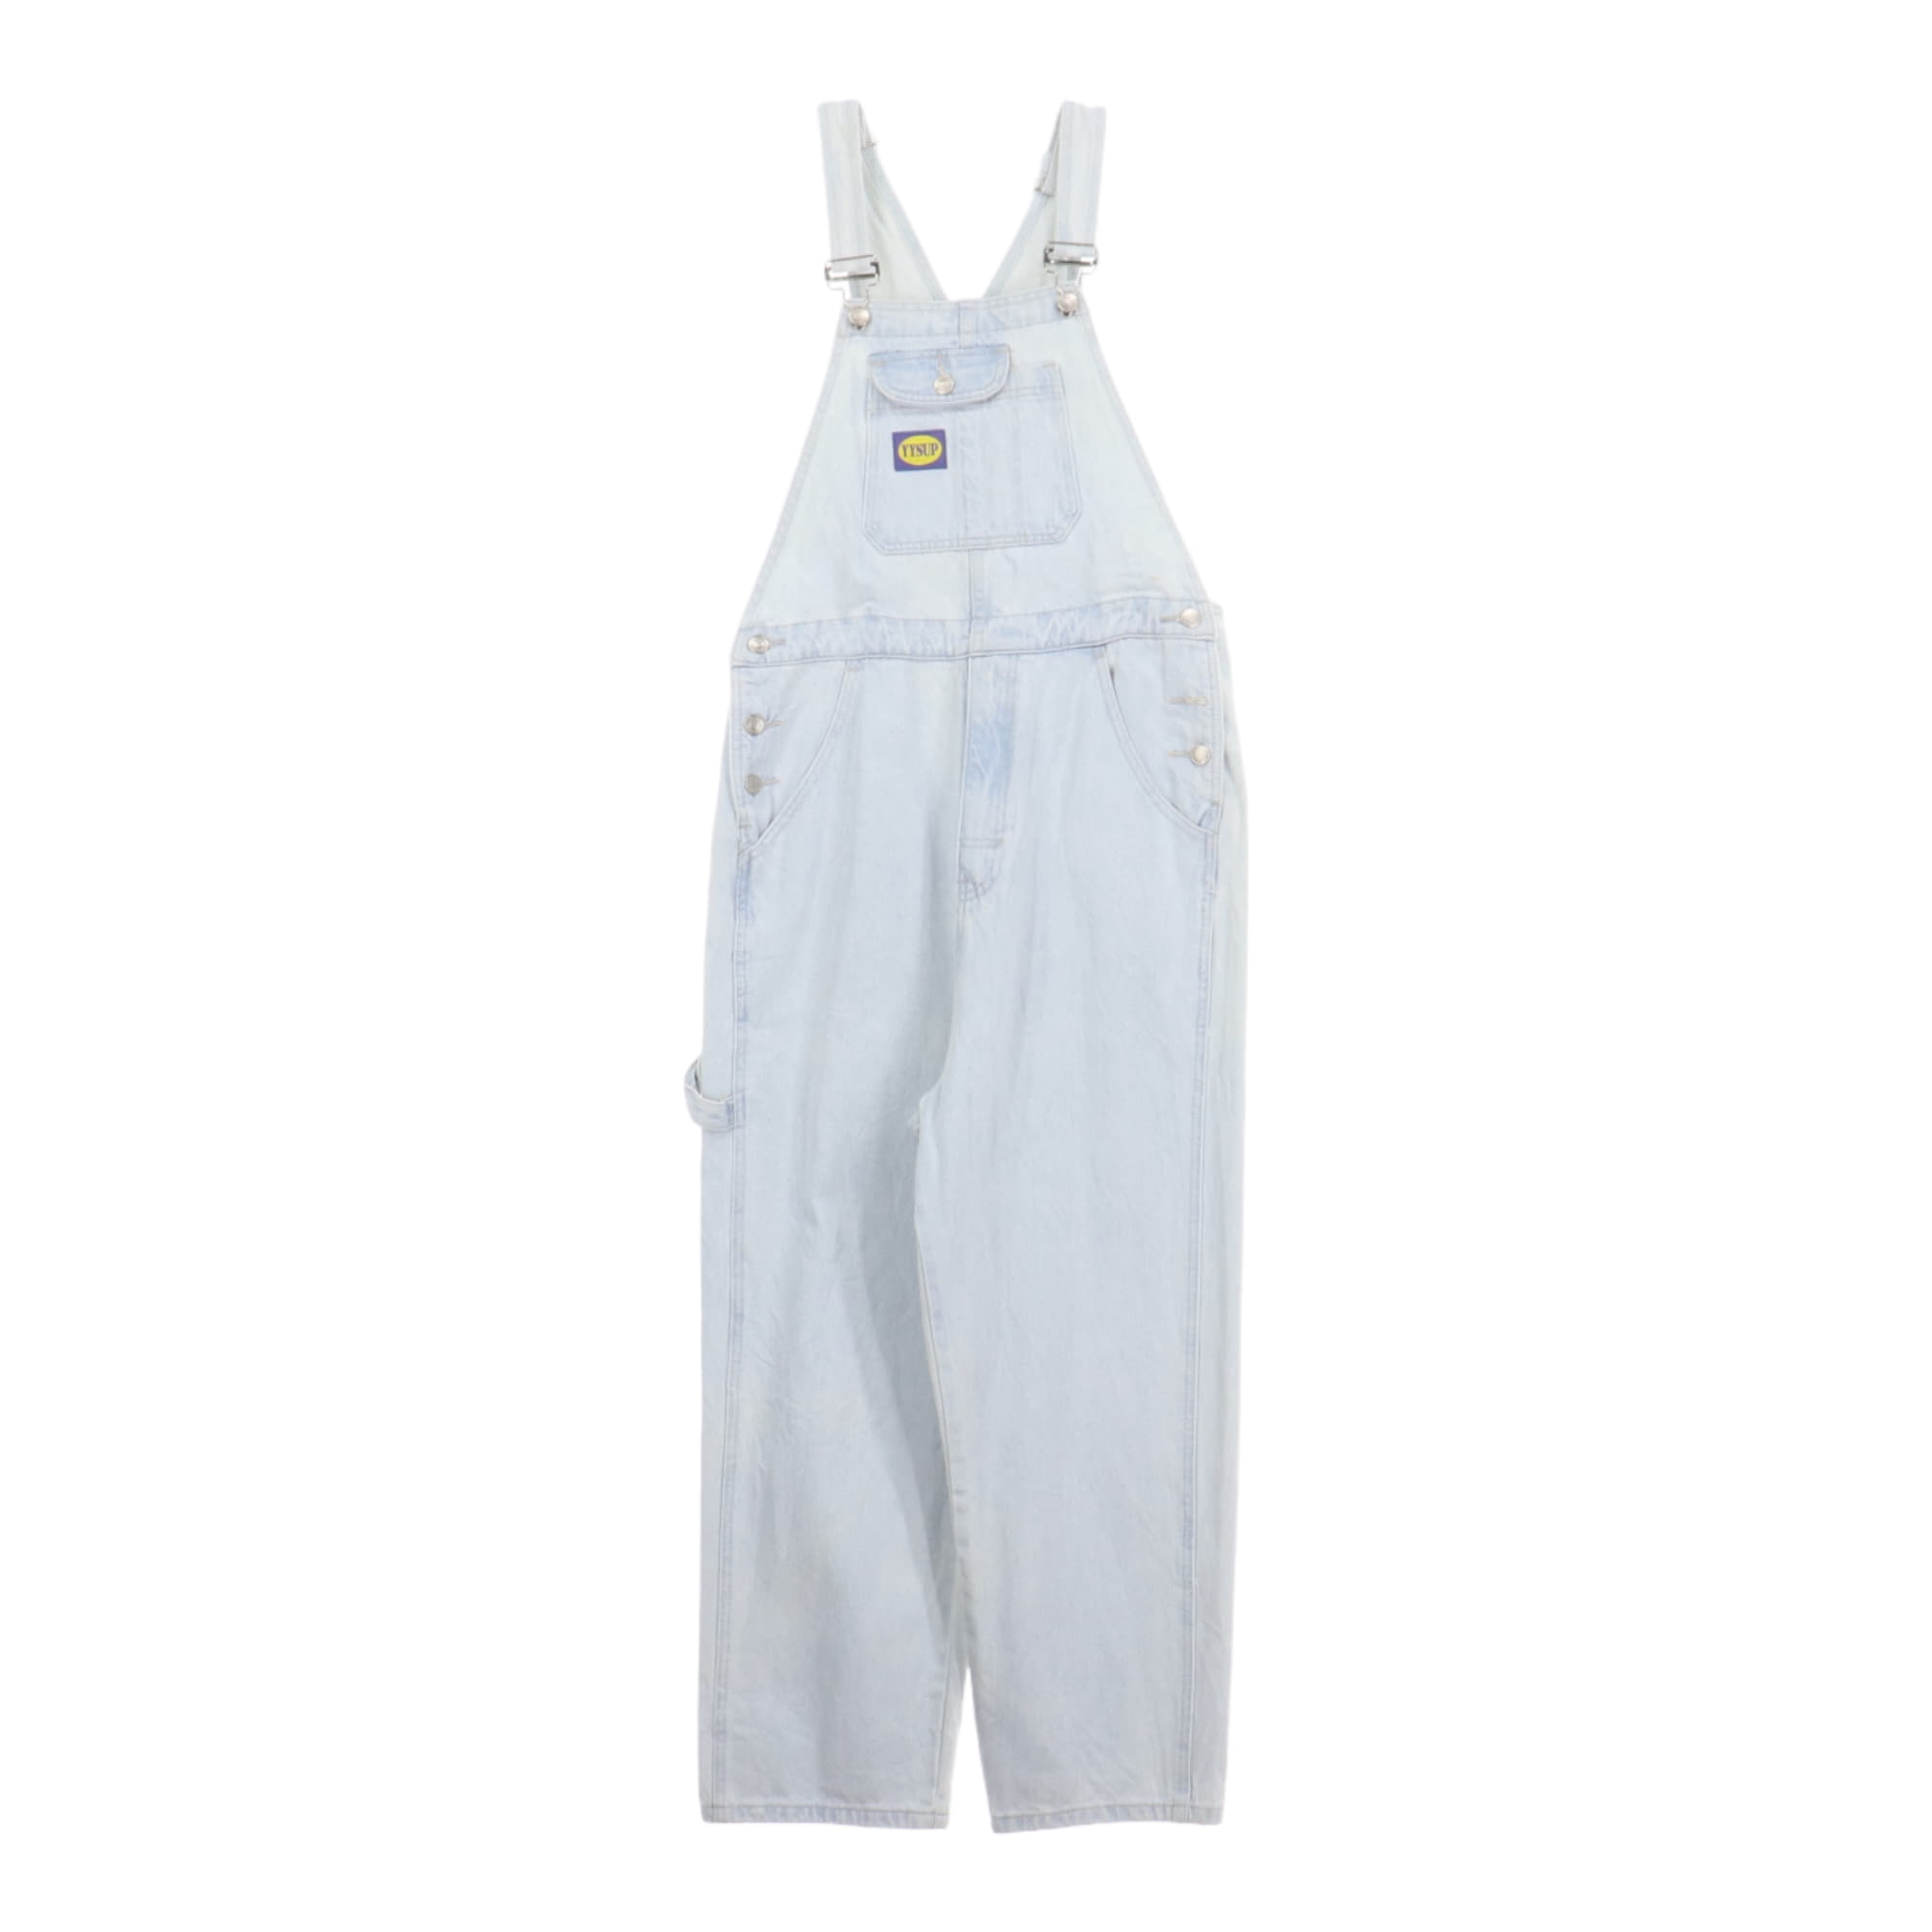 Yysup,Overall/Jumpsuit